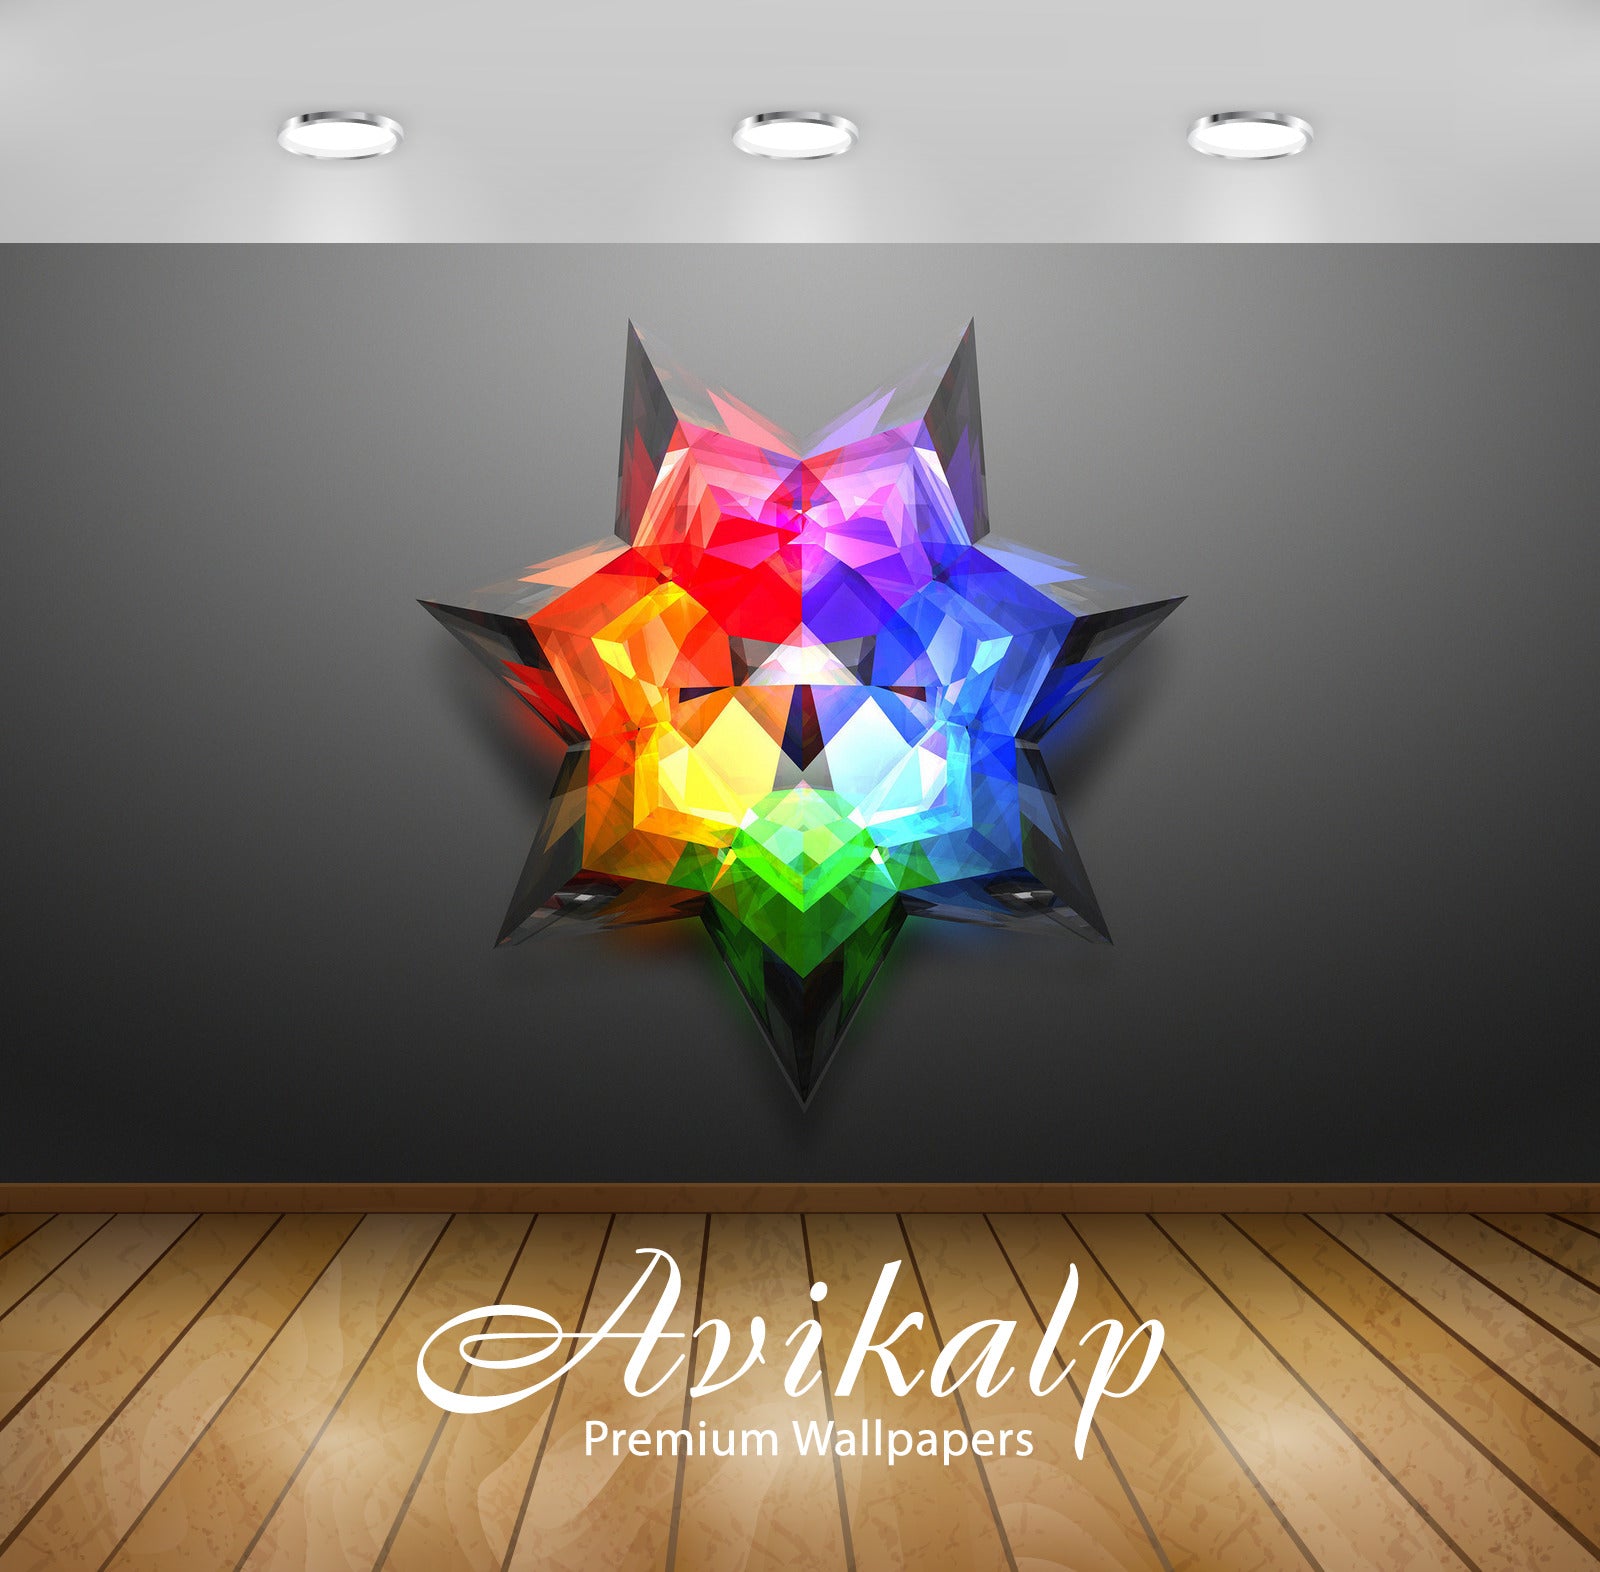 Avikalp Exclusive Awi4591 Rainbow Star Full HD Wallpapers for Living room, Hall, Kids Room, Kitchen,